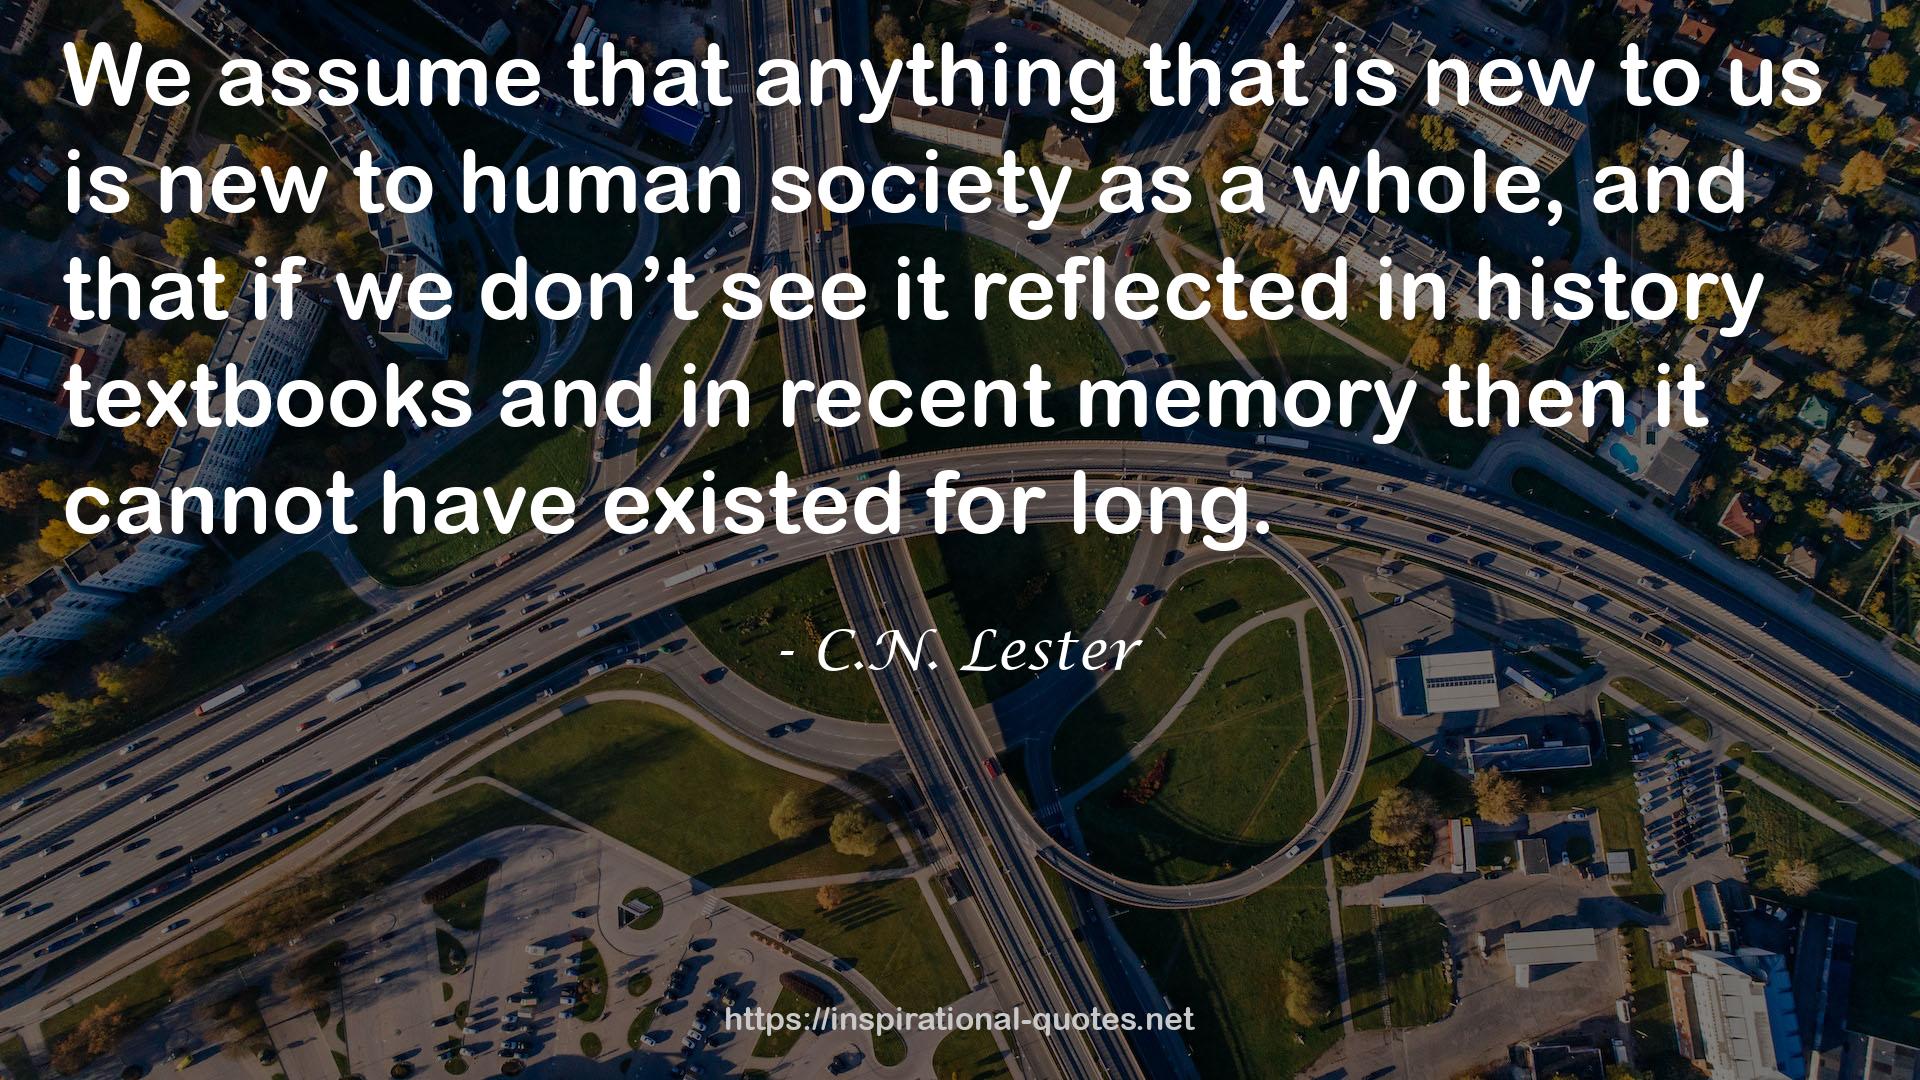 C.N. Lester QUOTES